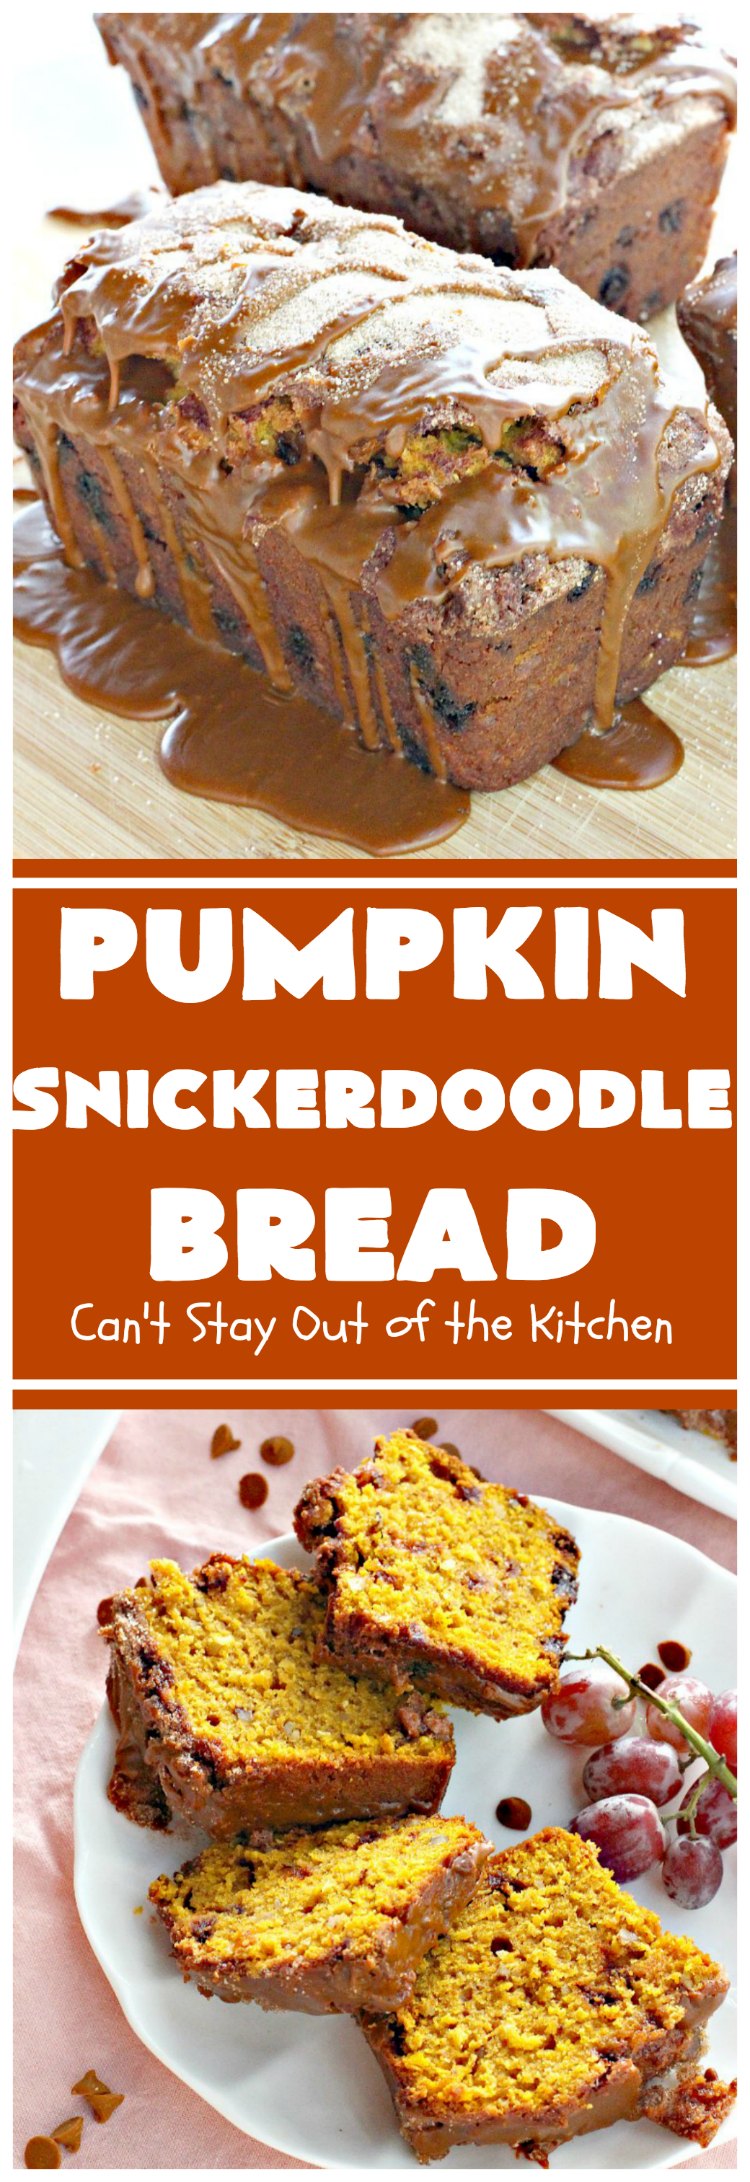 Pumpkin Snickerdoodle Bread | Can't Stay Out of the Kitchen